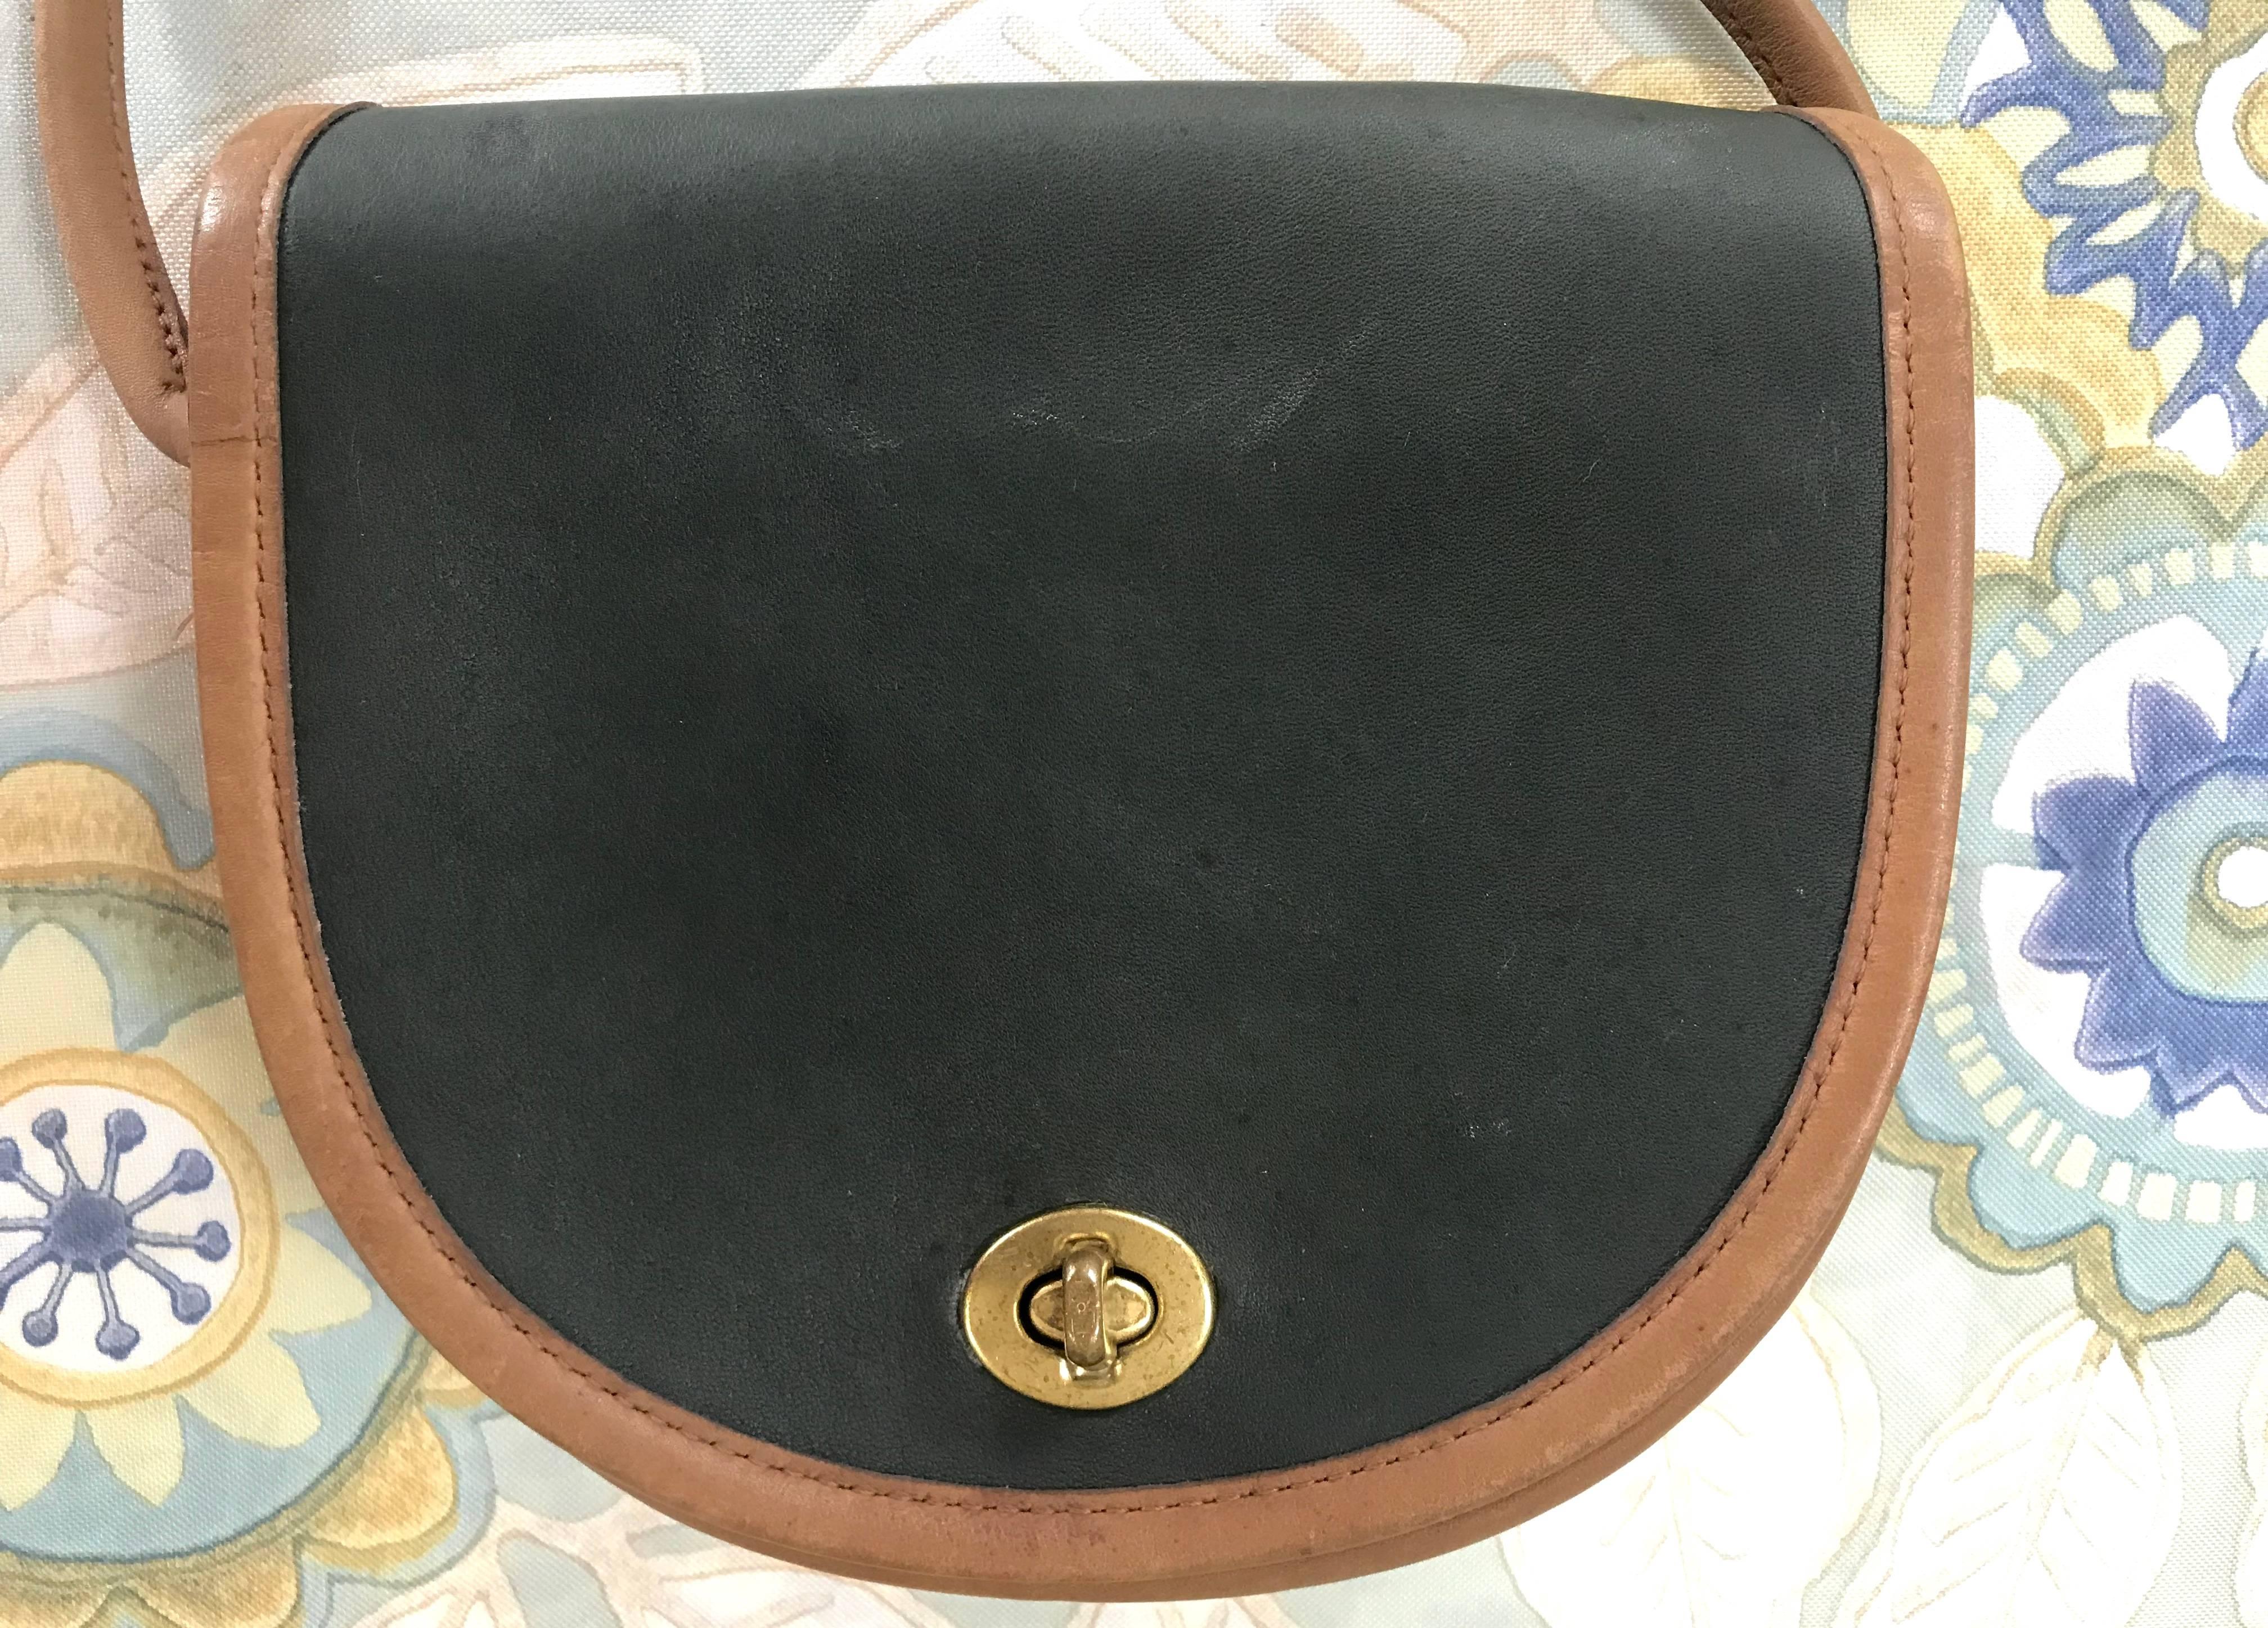 1990s. Vintage COACH genuine khaki and brown leather mini shoulder bag in half moon shape. Classic purse. Made in USA. 

Rare Coach bag in khaki and brown color combination!

This is a vintage piece of COACH in the 90’s. 
Genuine leather and cute